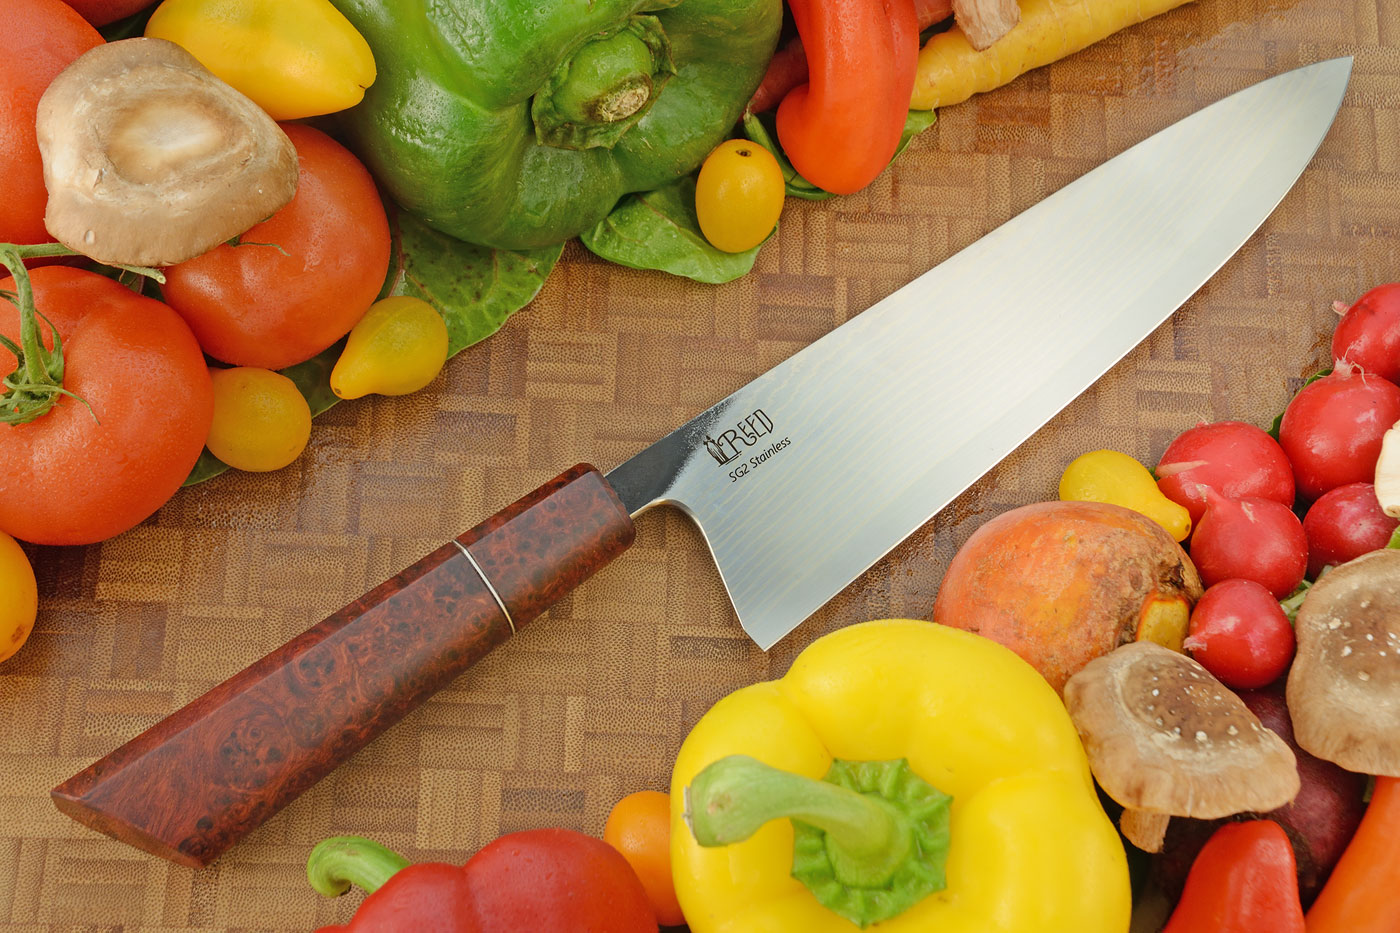 Chef's Knife with Amboyna Burl (9 inches) - SG2 Stainless Damascus San Mai